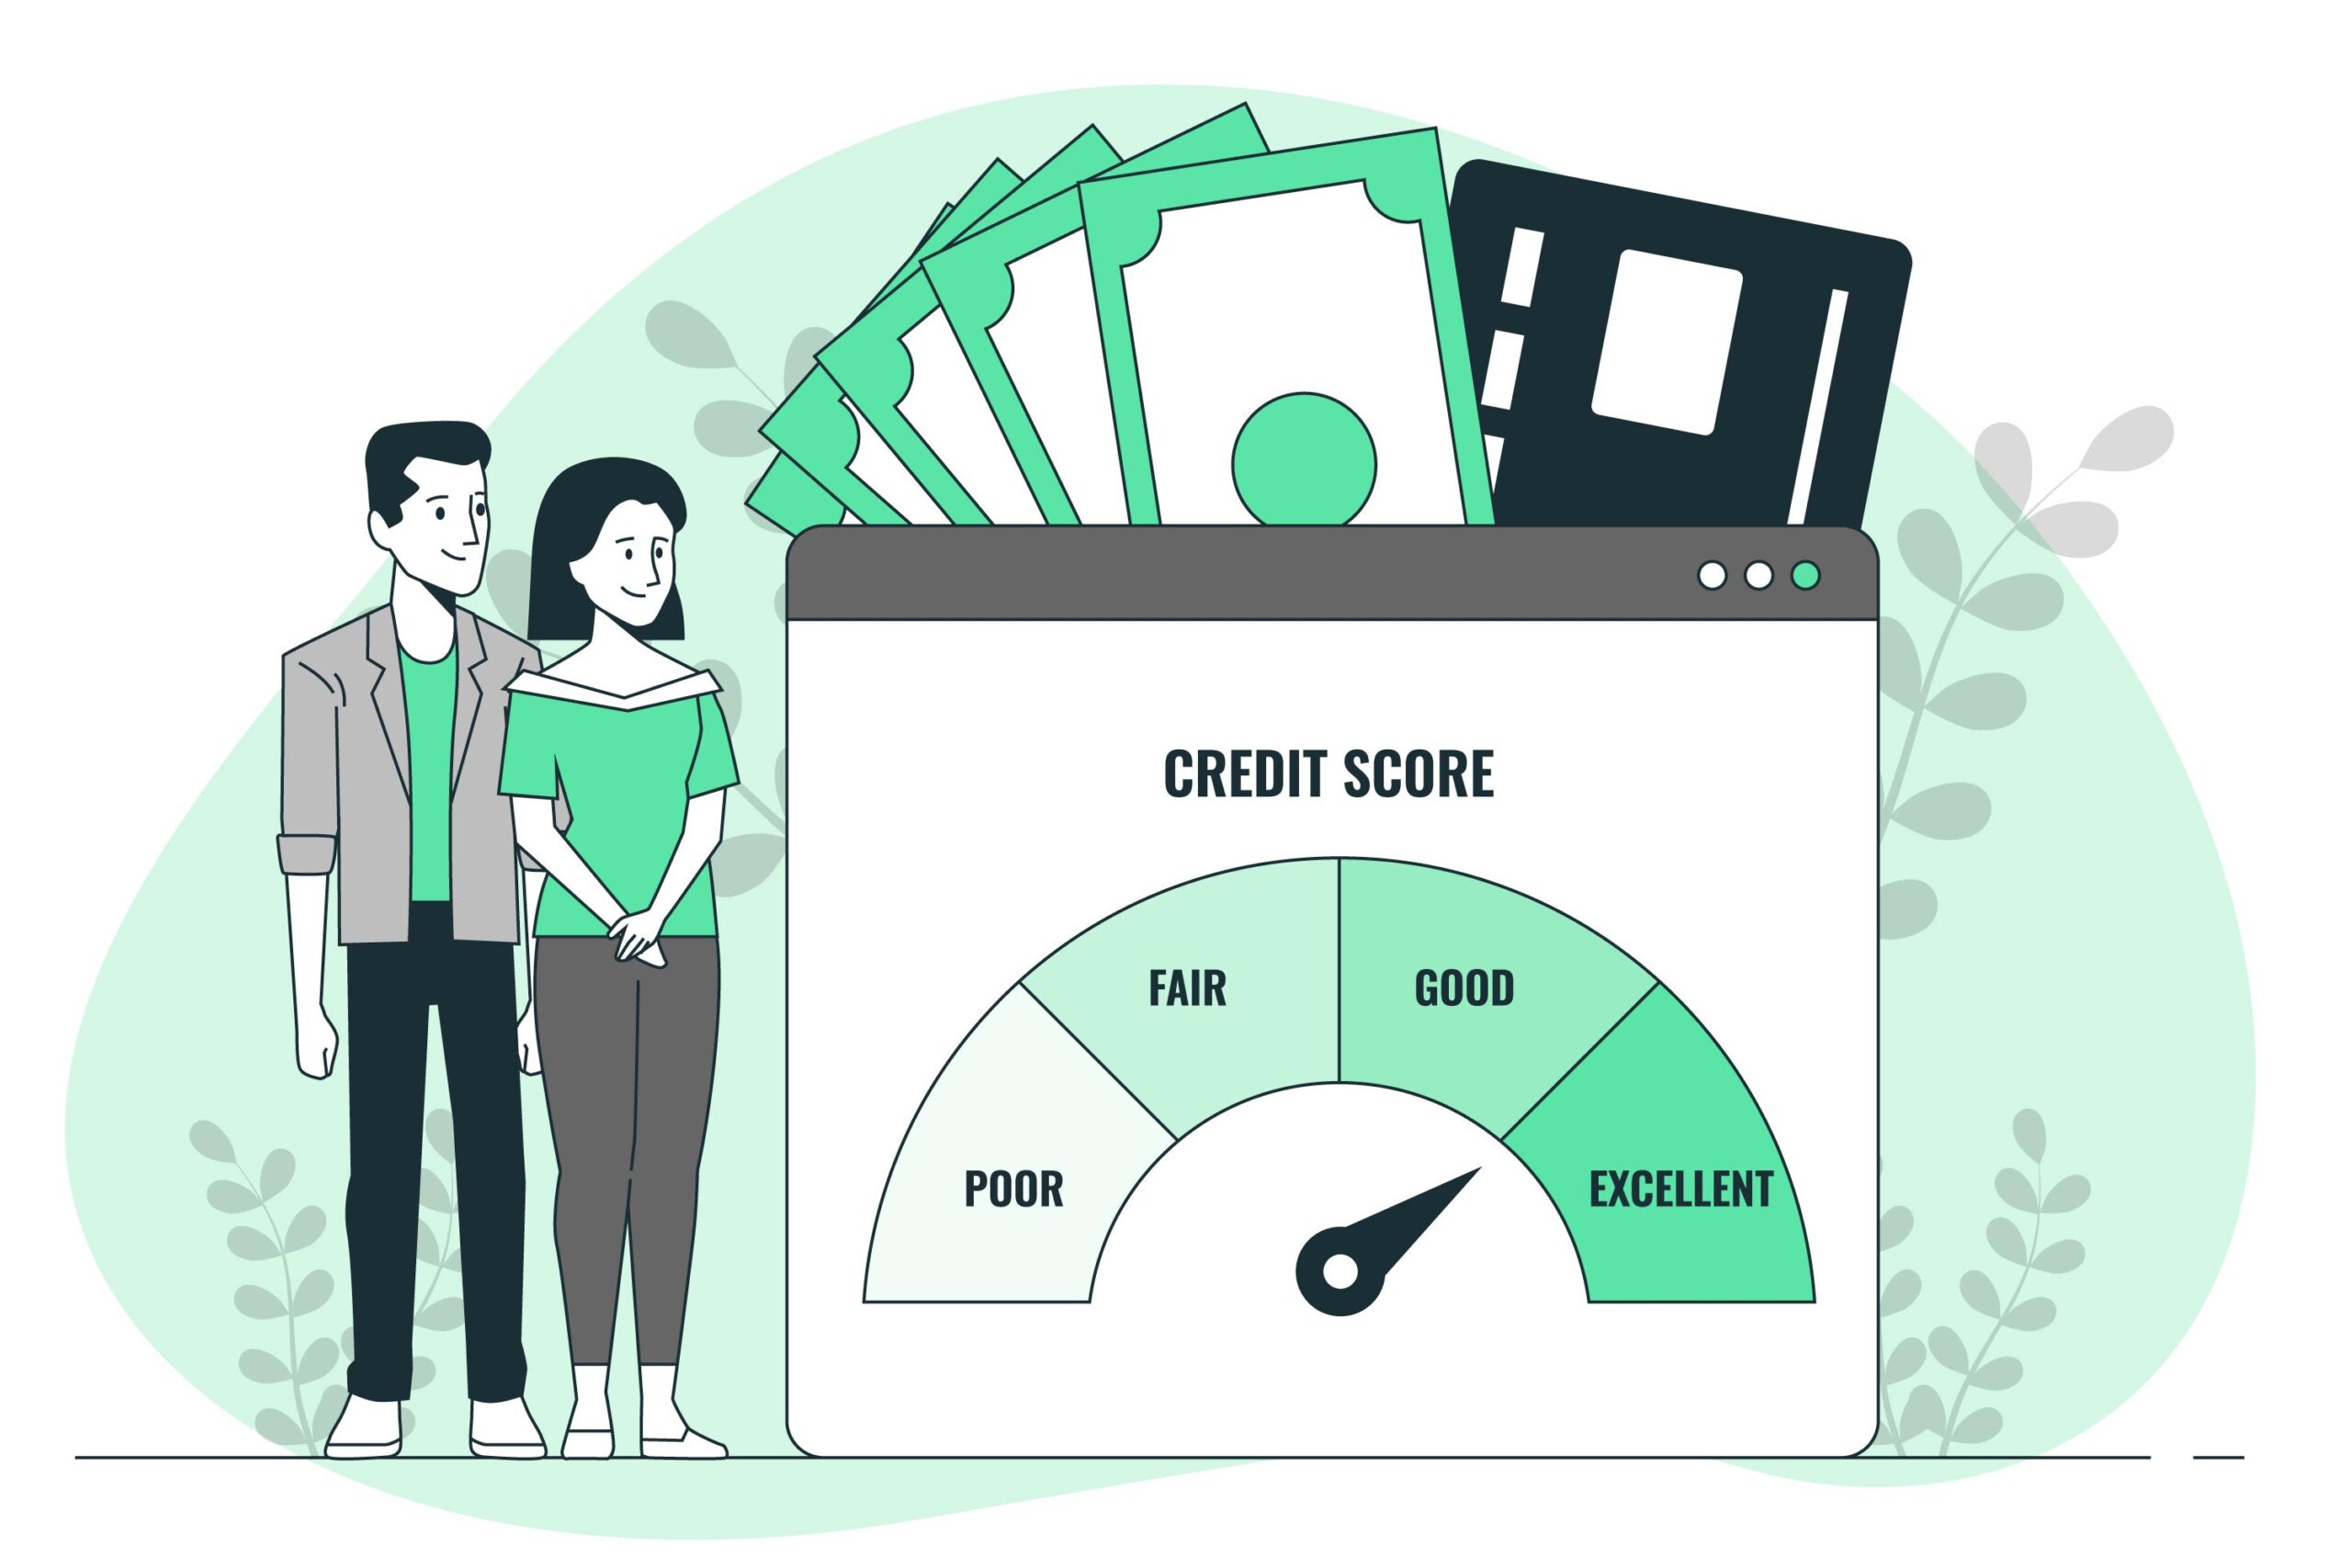 How to start building credit score in the UK?